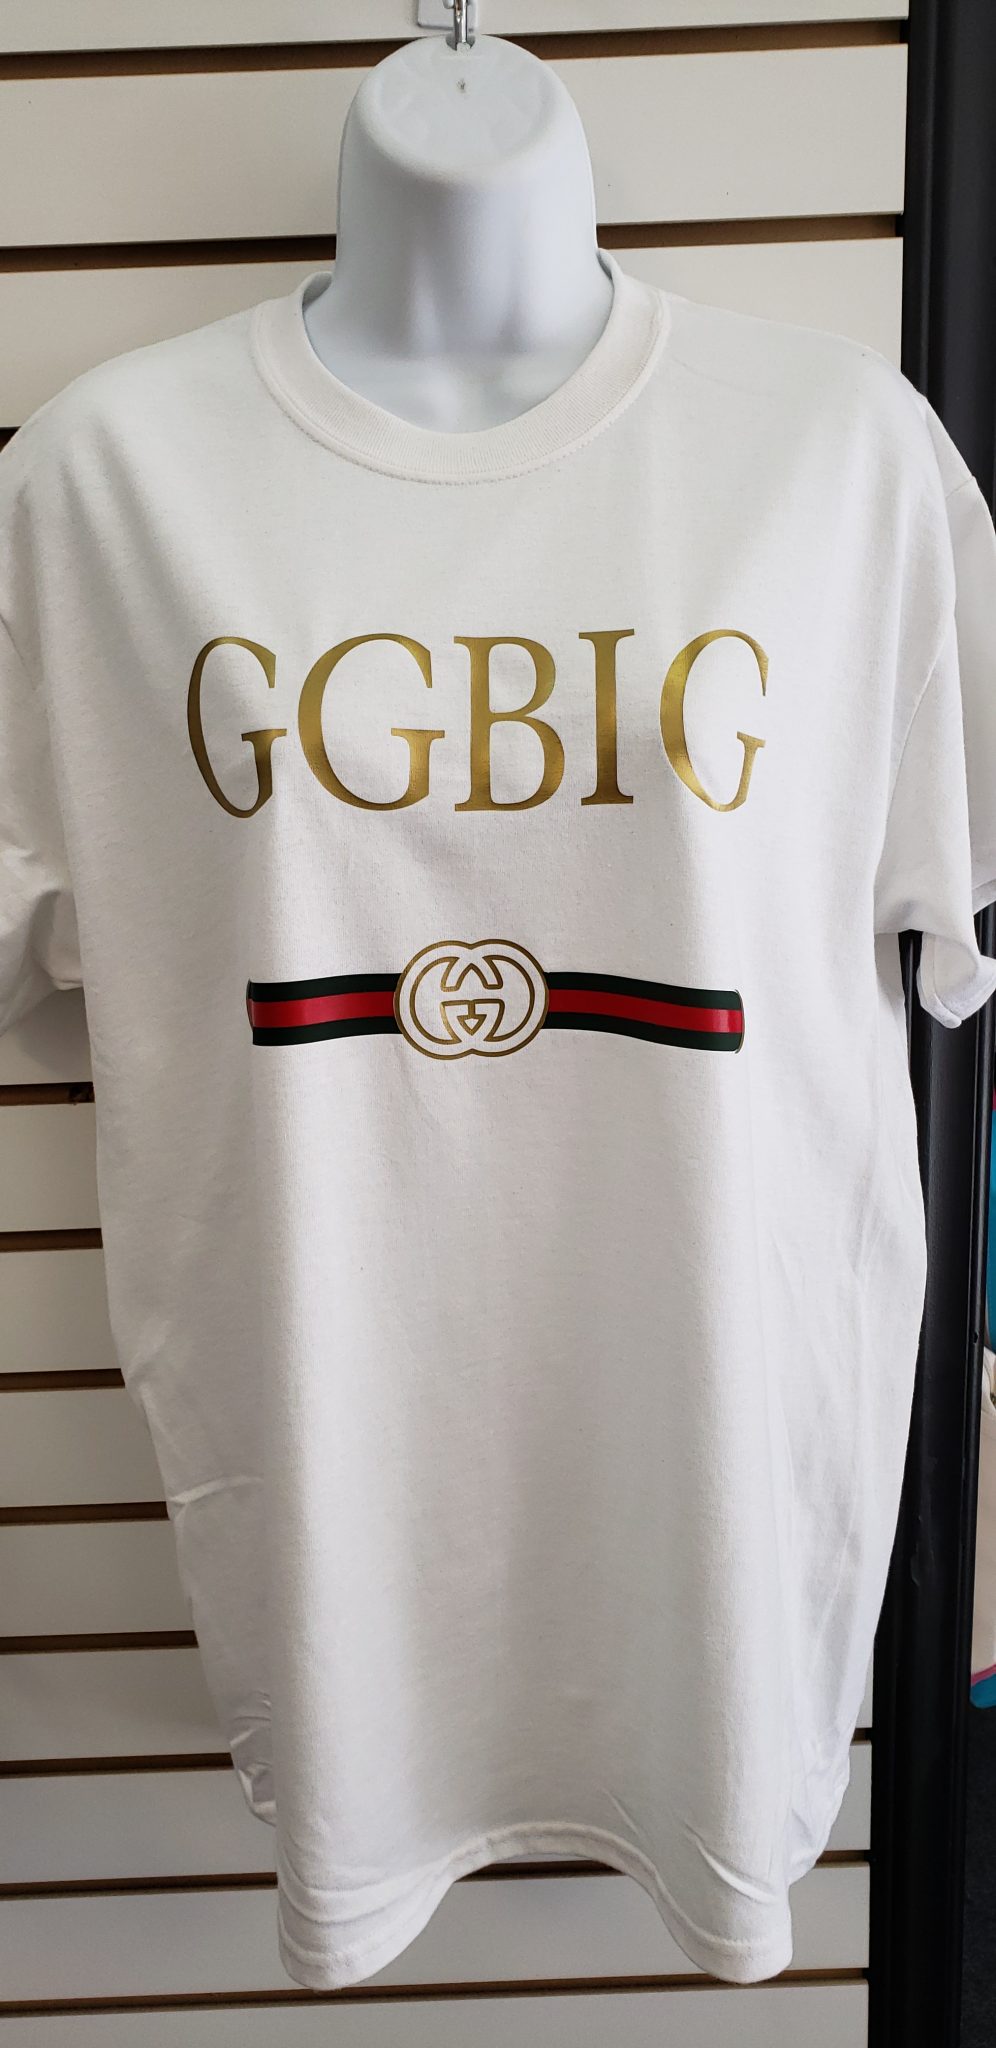 Gucci Could Be Revealing a New GG Logo